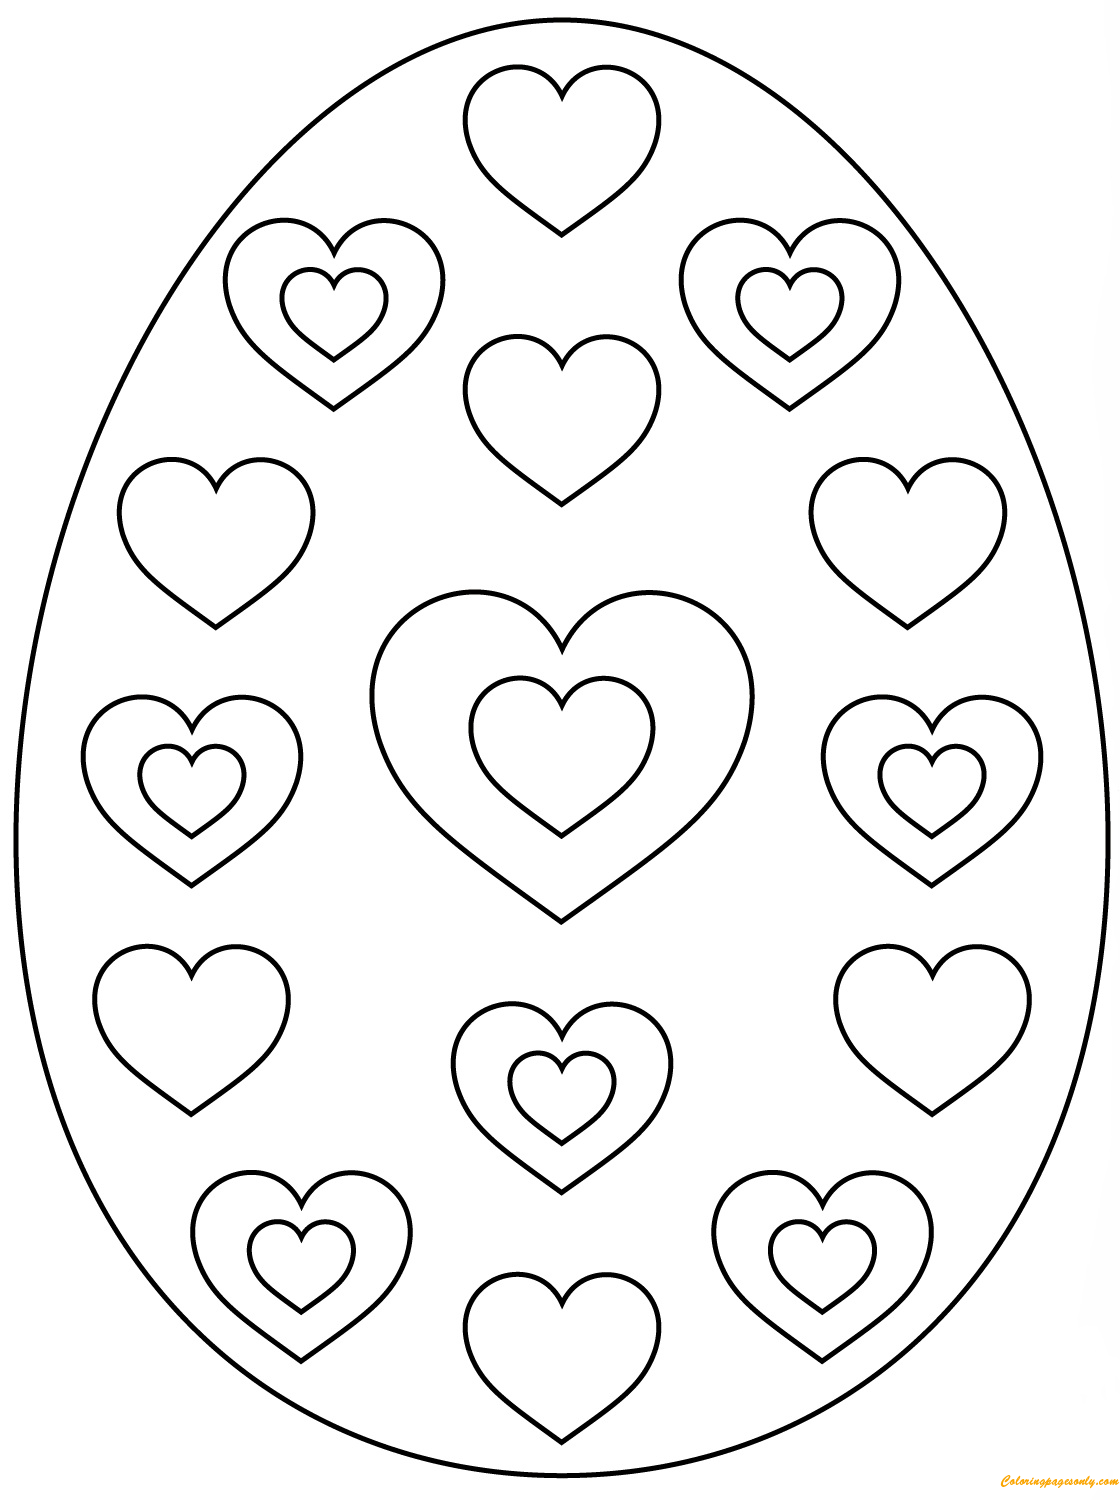 Easter Egg Hearts Pattern Coloring Pages - Arts & Culture Coloring